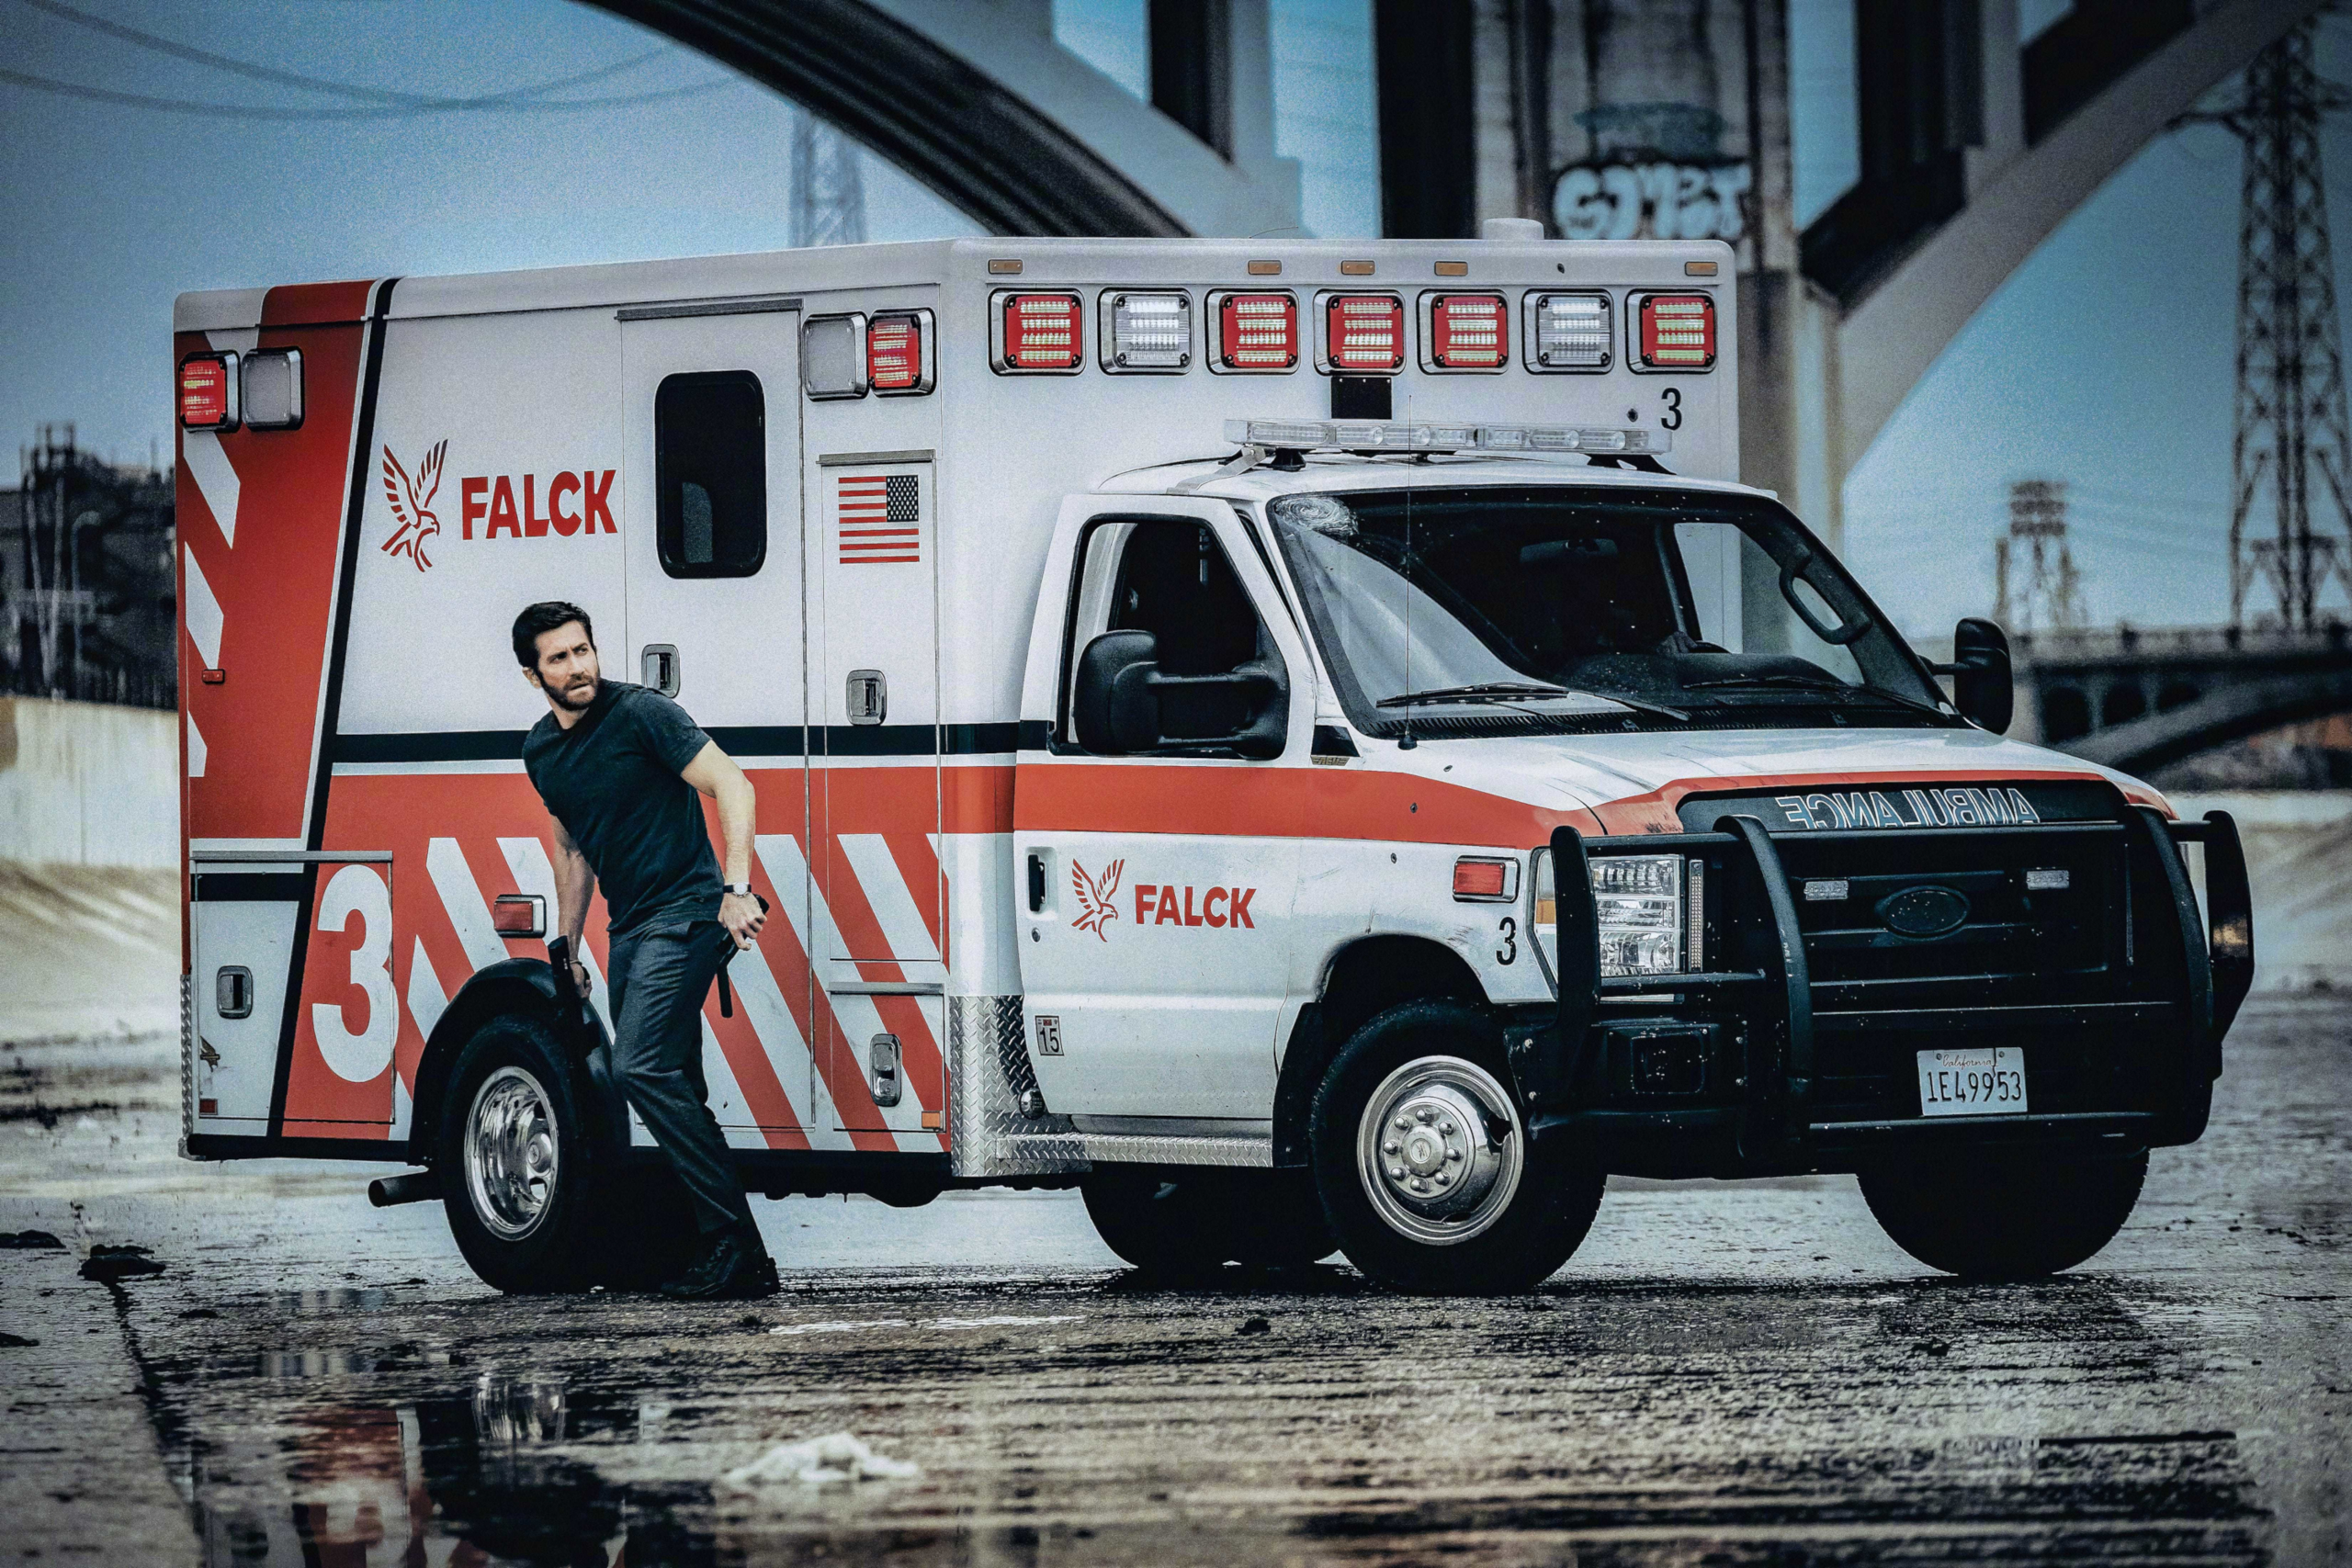 Ambulance hd papers and backgrounds